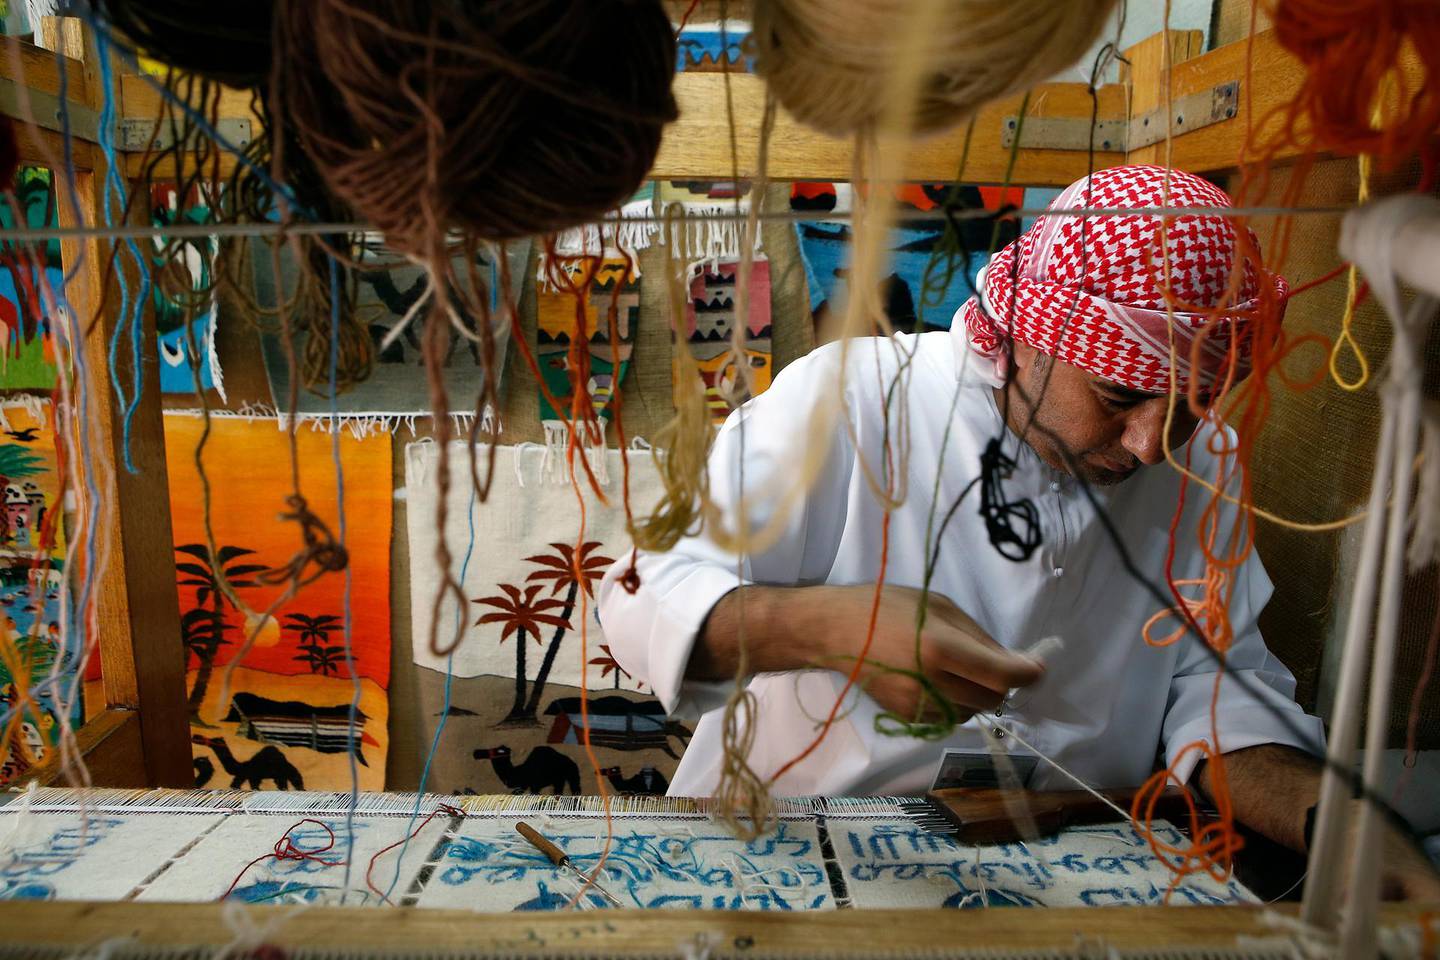 ABU DHABI - UNITED ARAB EMIRATES - 08MAY2017 - Amer Eid Ahmed who demonstrates his carpet weaving skills to tourist at Emirates Heritage village at the breakwaters in Abu Dhabi. Ravindranath K / The National (Standalone for News) *** Local Caption ***  RK0805-WEAVING05.jpg